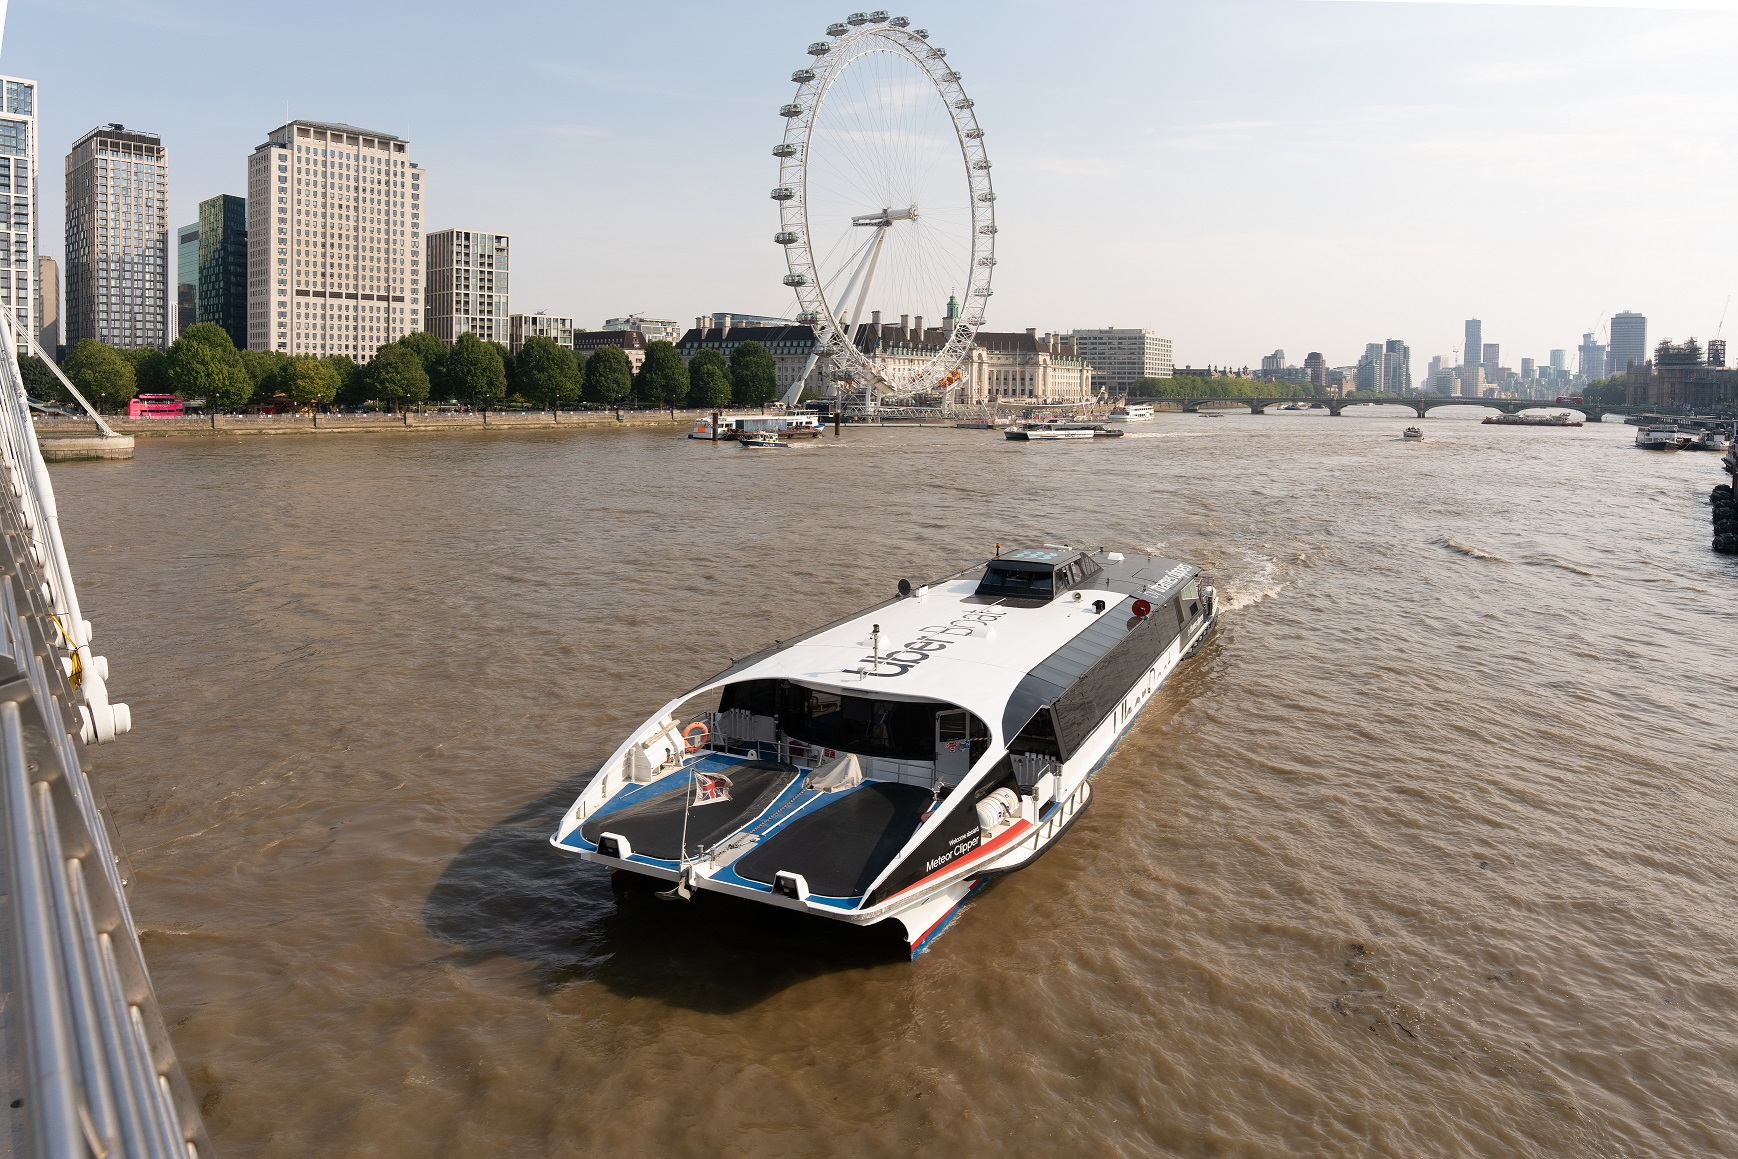 A ferry operated by Uber Boat by Thames Clippers